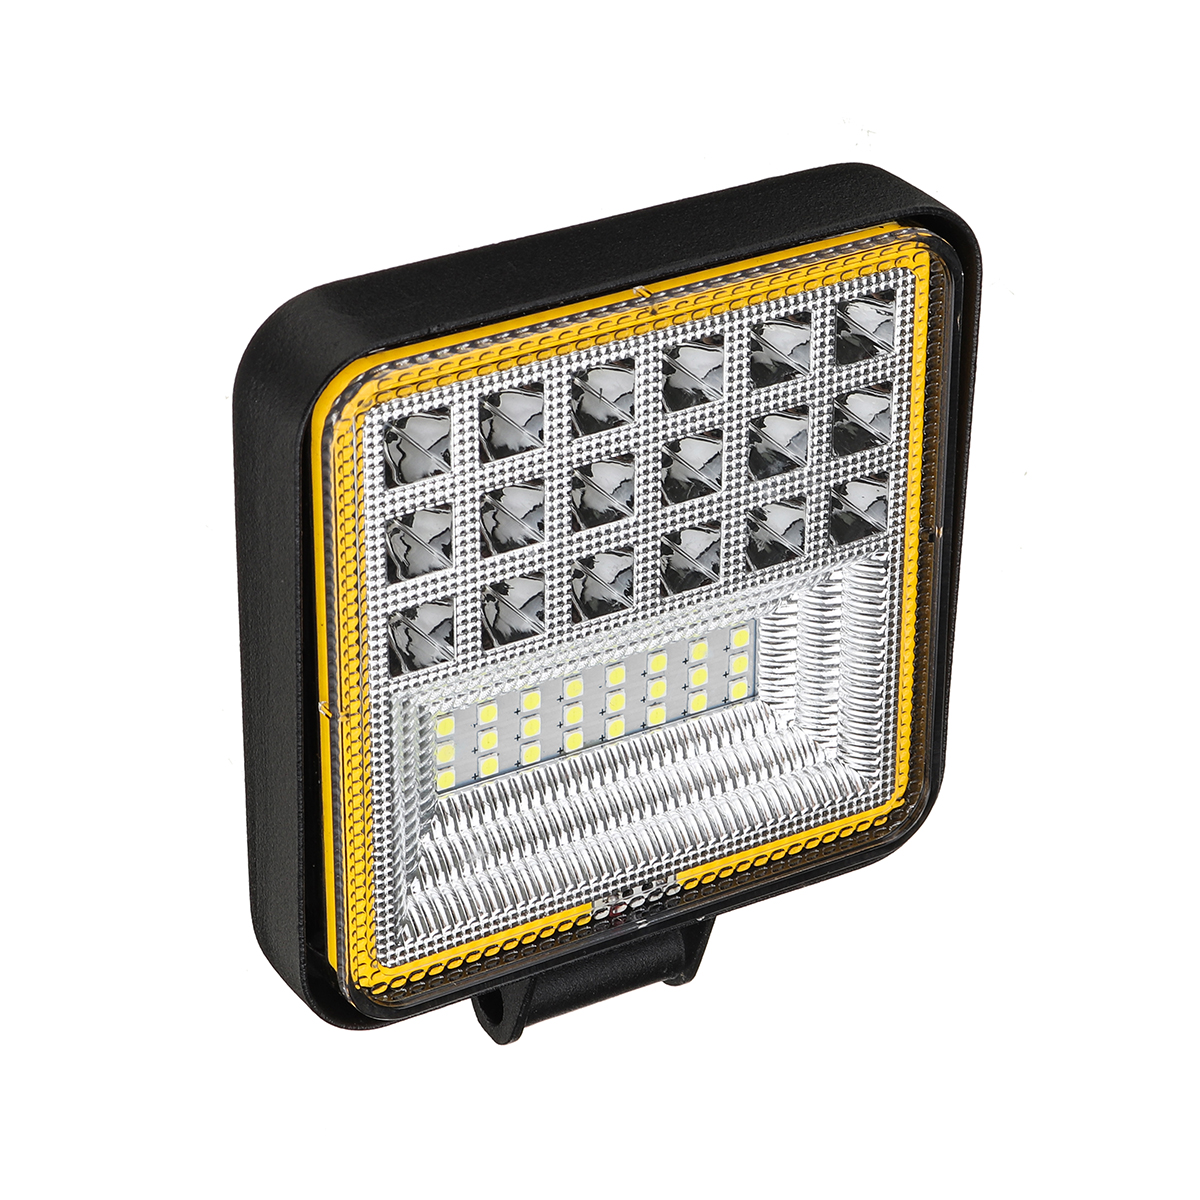 Universal Car LED Work Light Vehicle Spotlight Lamp Square 200W 6000K 8000LM Waterproof for Off-Road Car Boat Camp